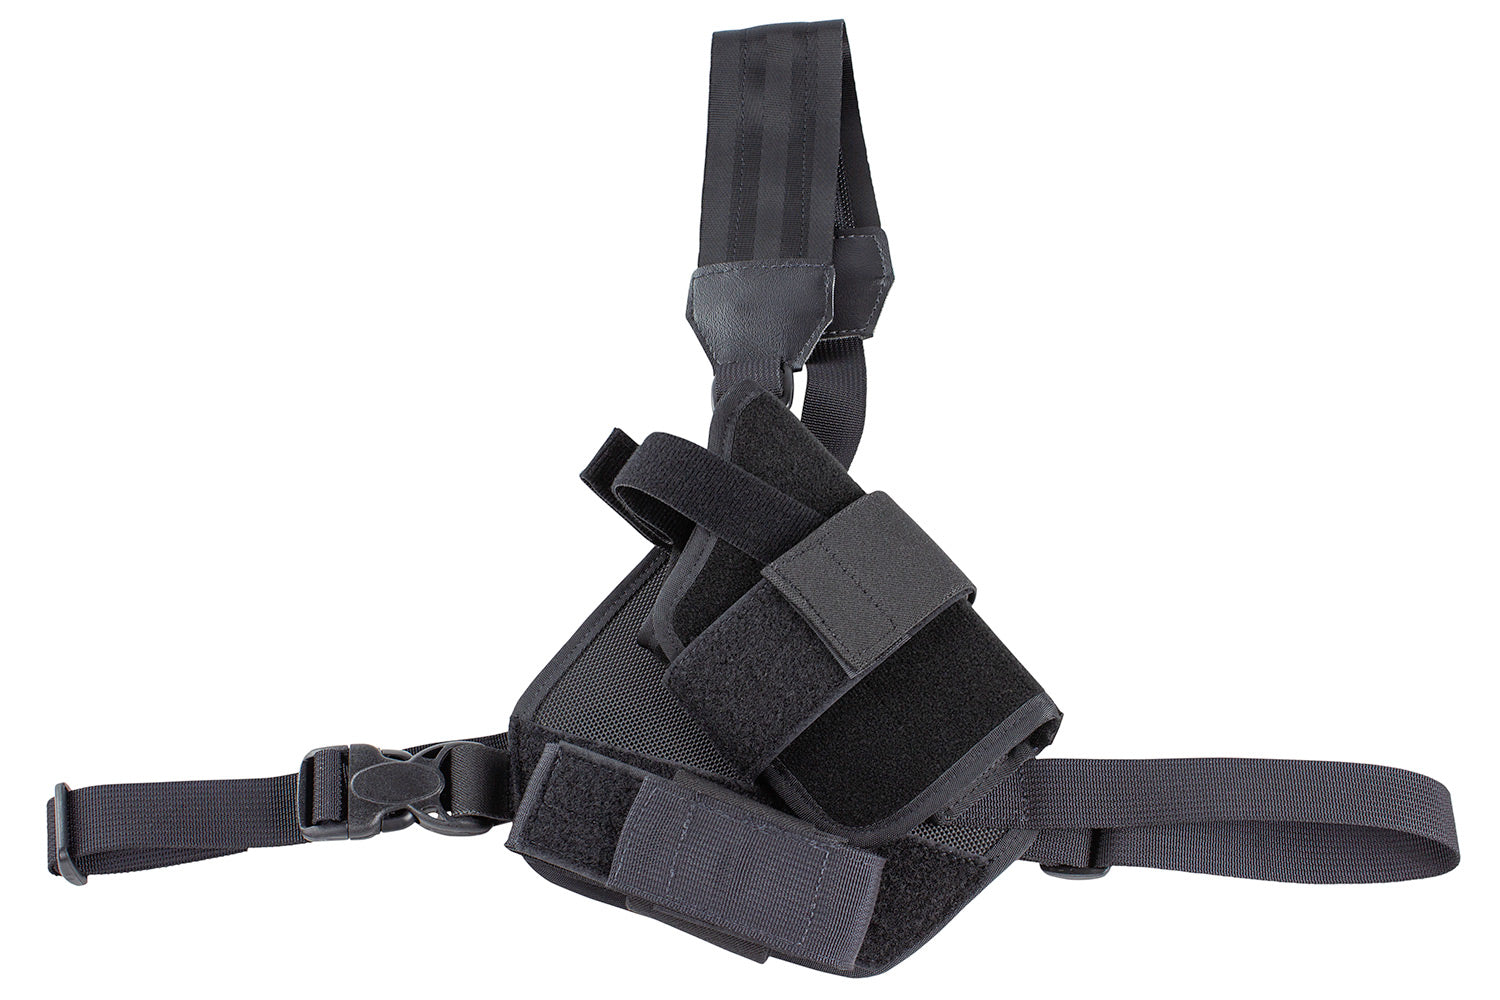 Warden Chest Holster with spare magazine pouch